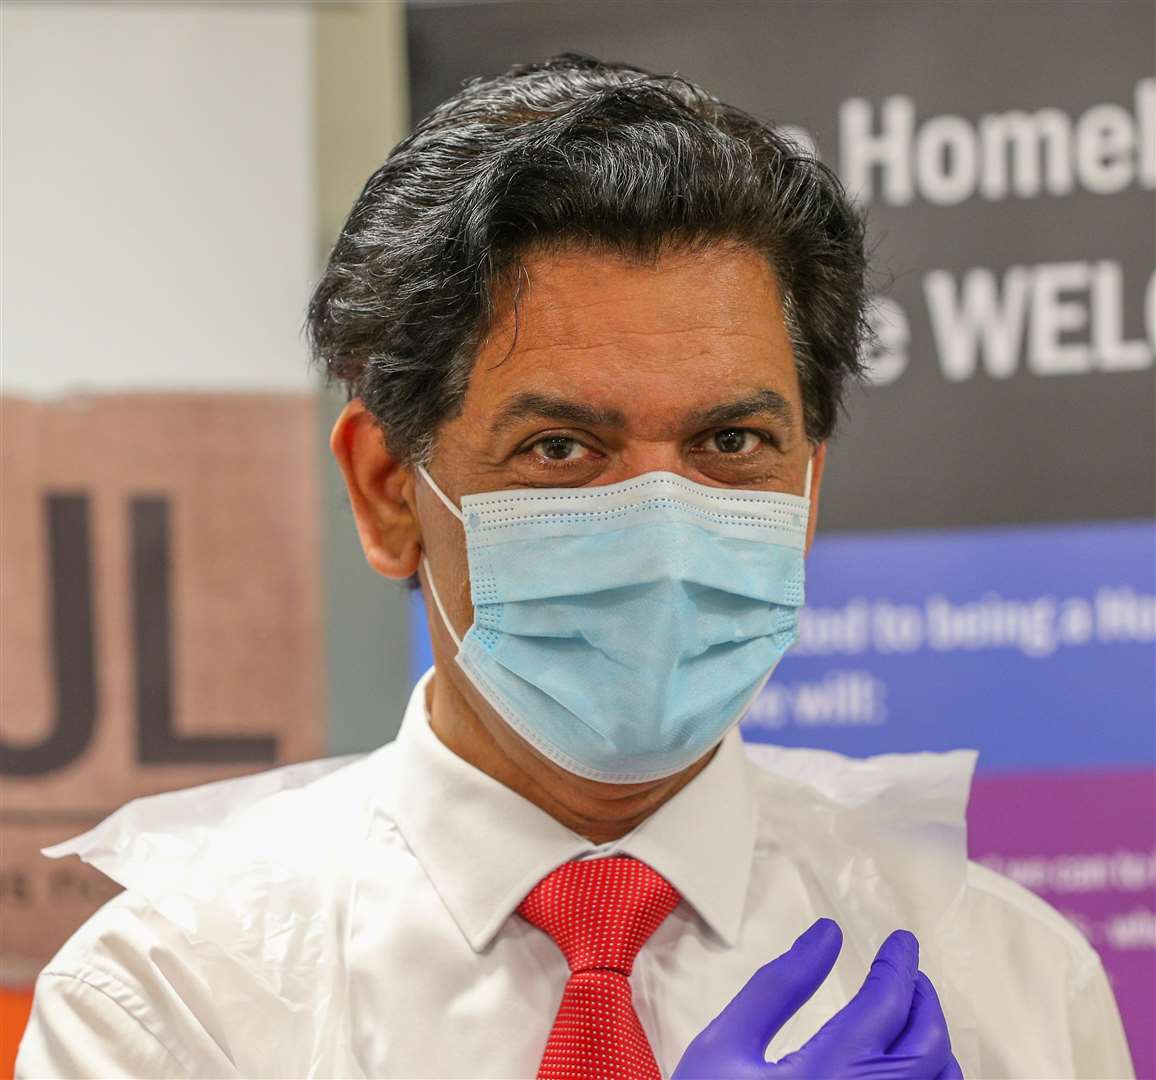 Dr Chauhan has urged the Home Secretary to visit his charity so she can learn of the struggles that homeless people face (Peter Byrne/PA)